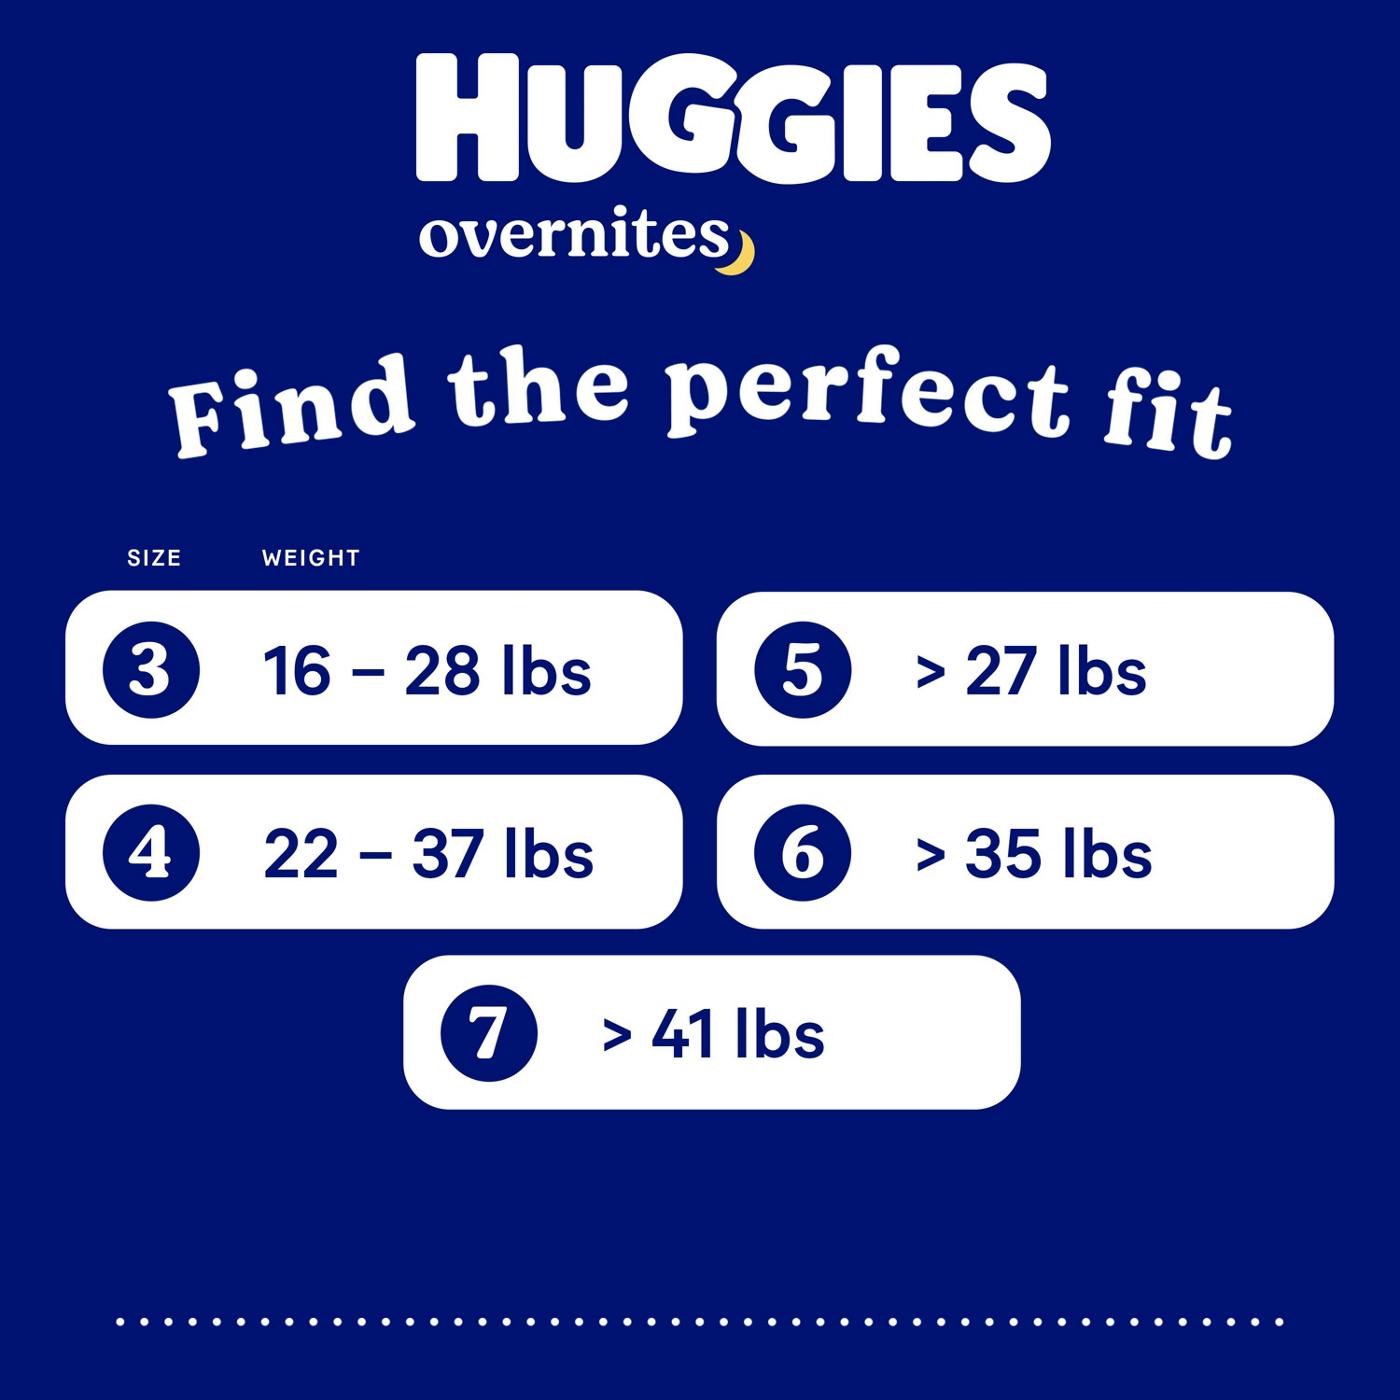 Huggies Overnites Nighttime Baby Diapers - Size 7; image 4 of 8